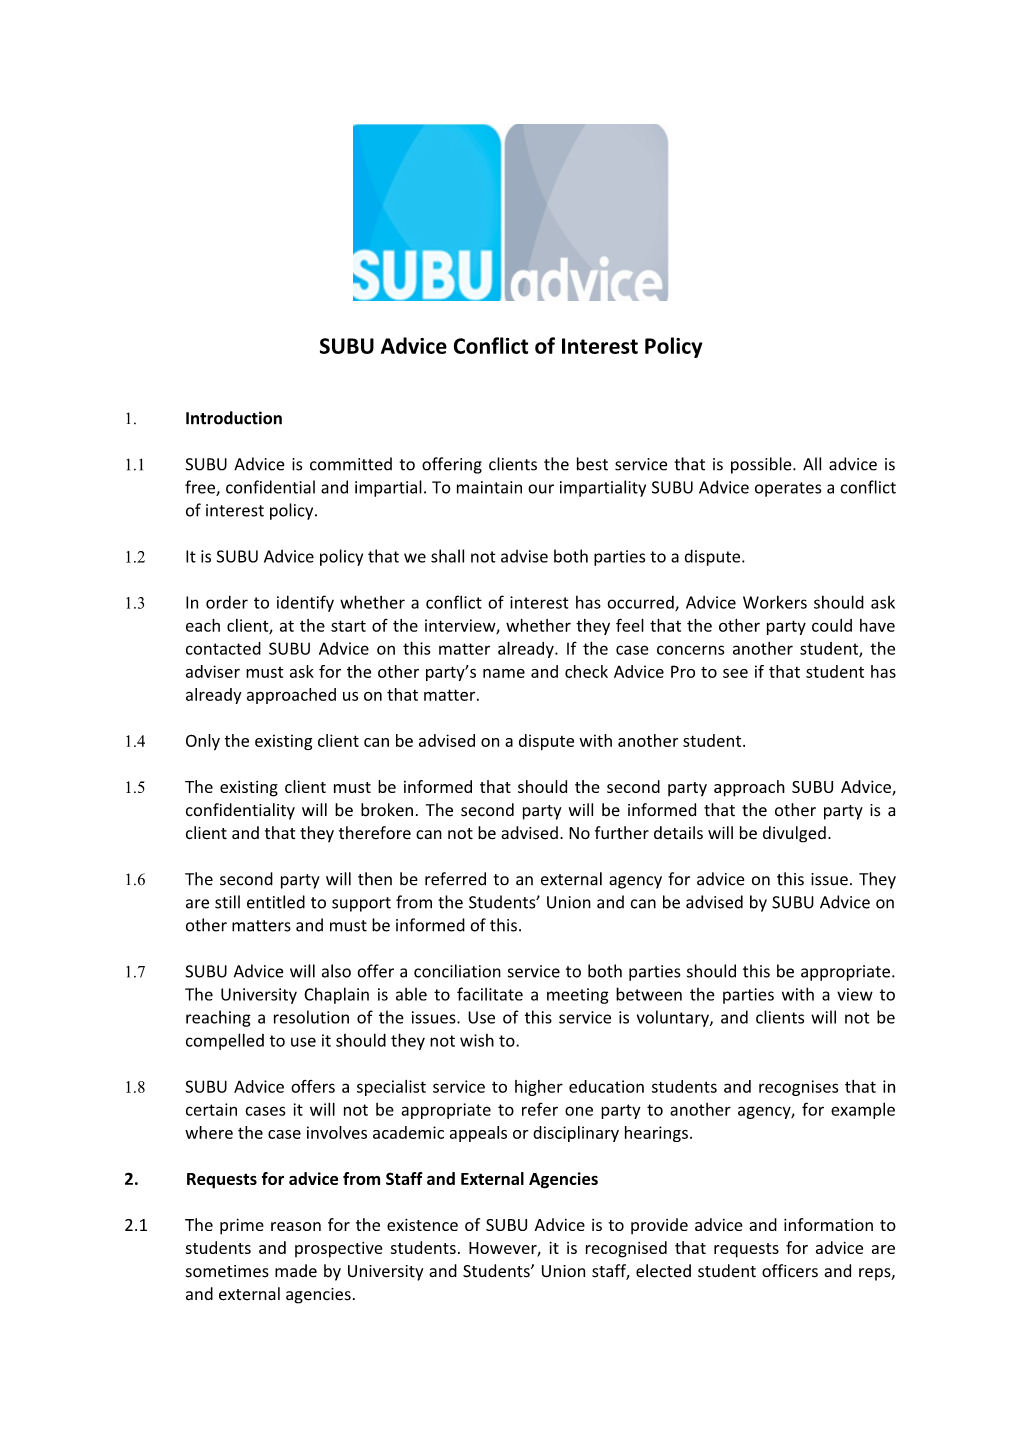 SUBU Advice Conflict of Interest Policy